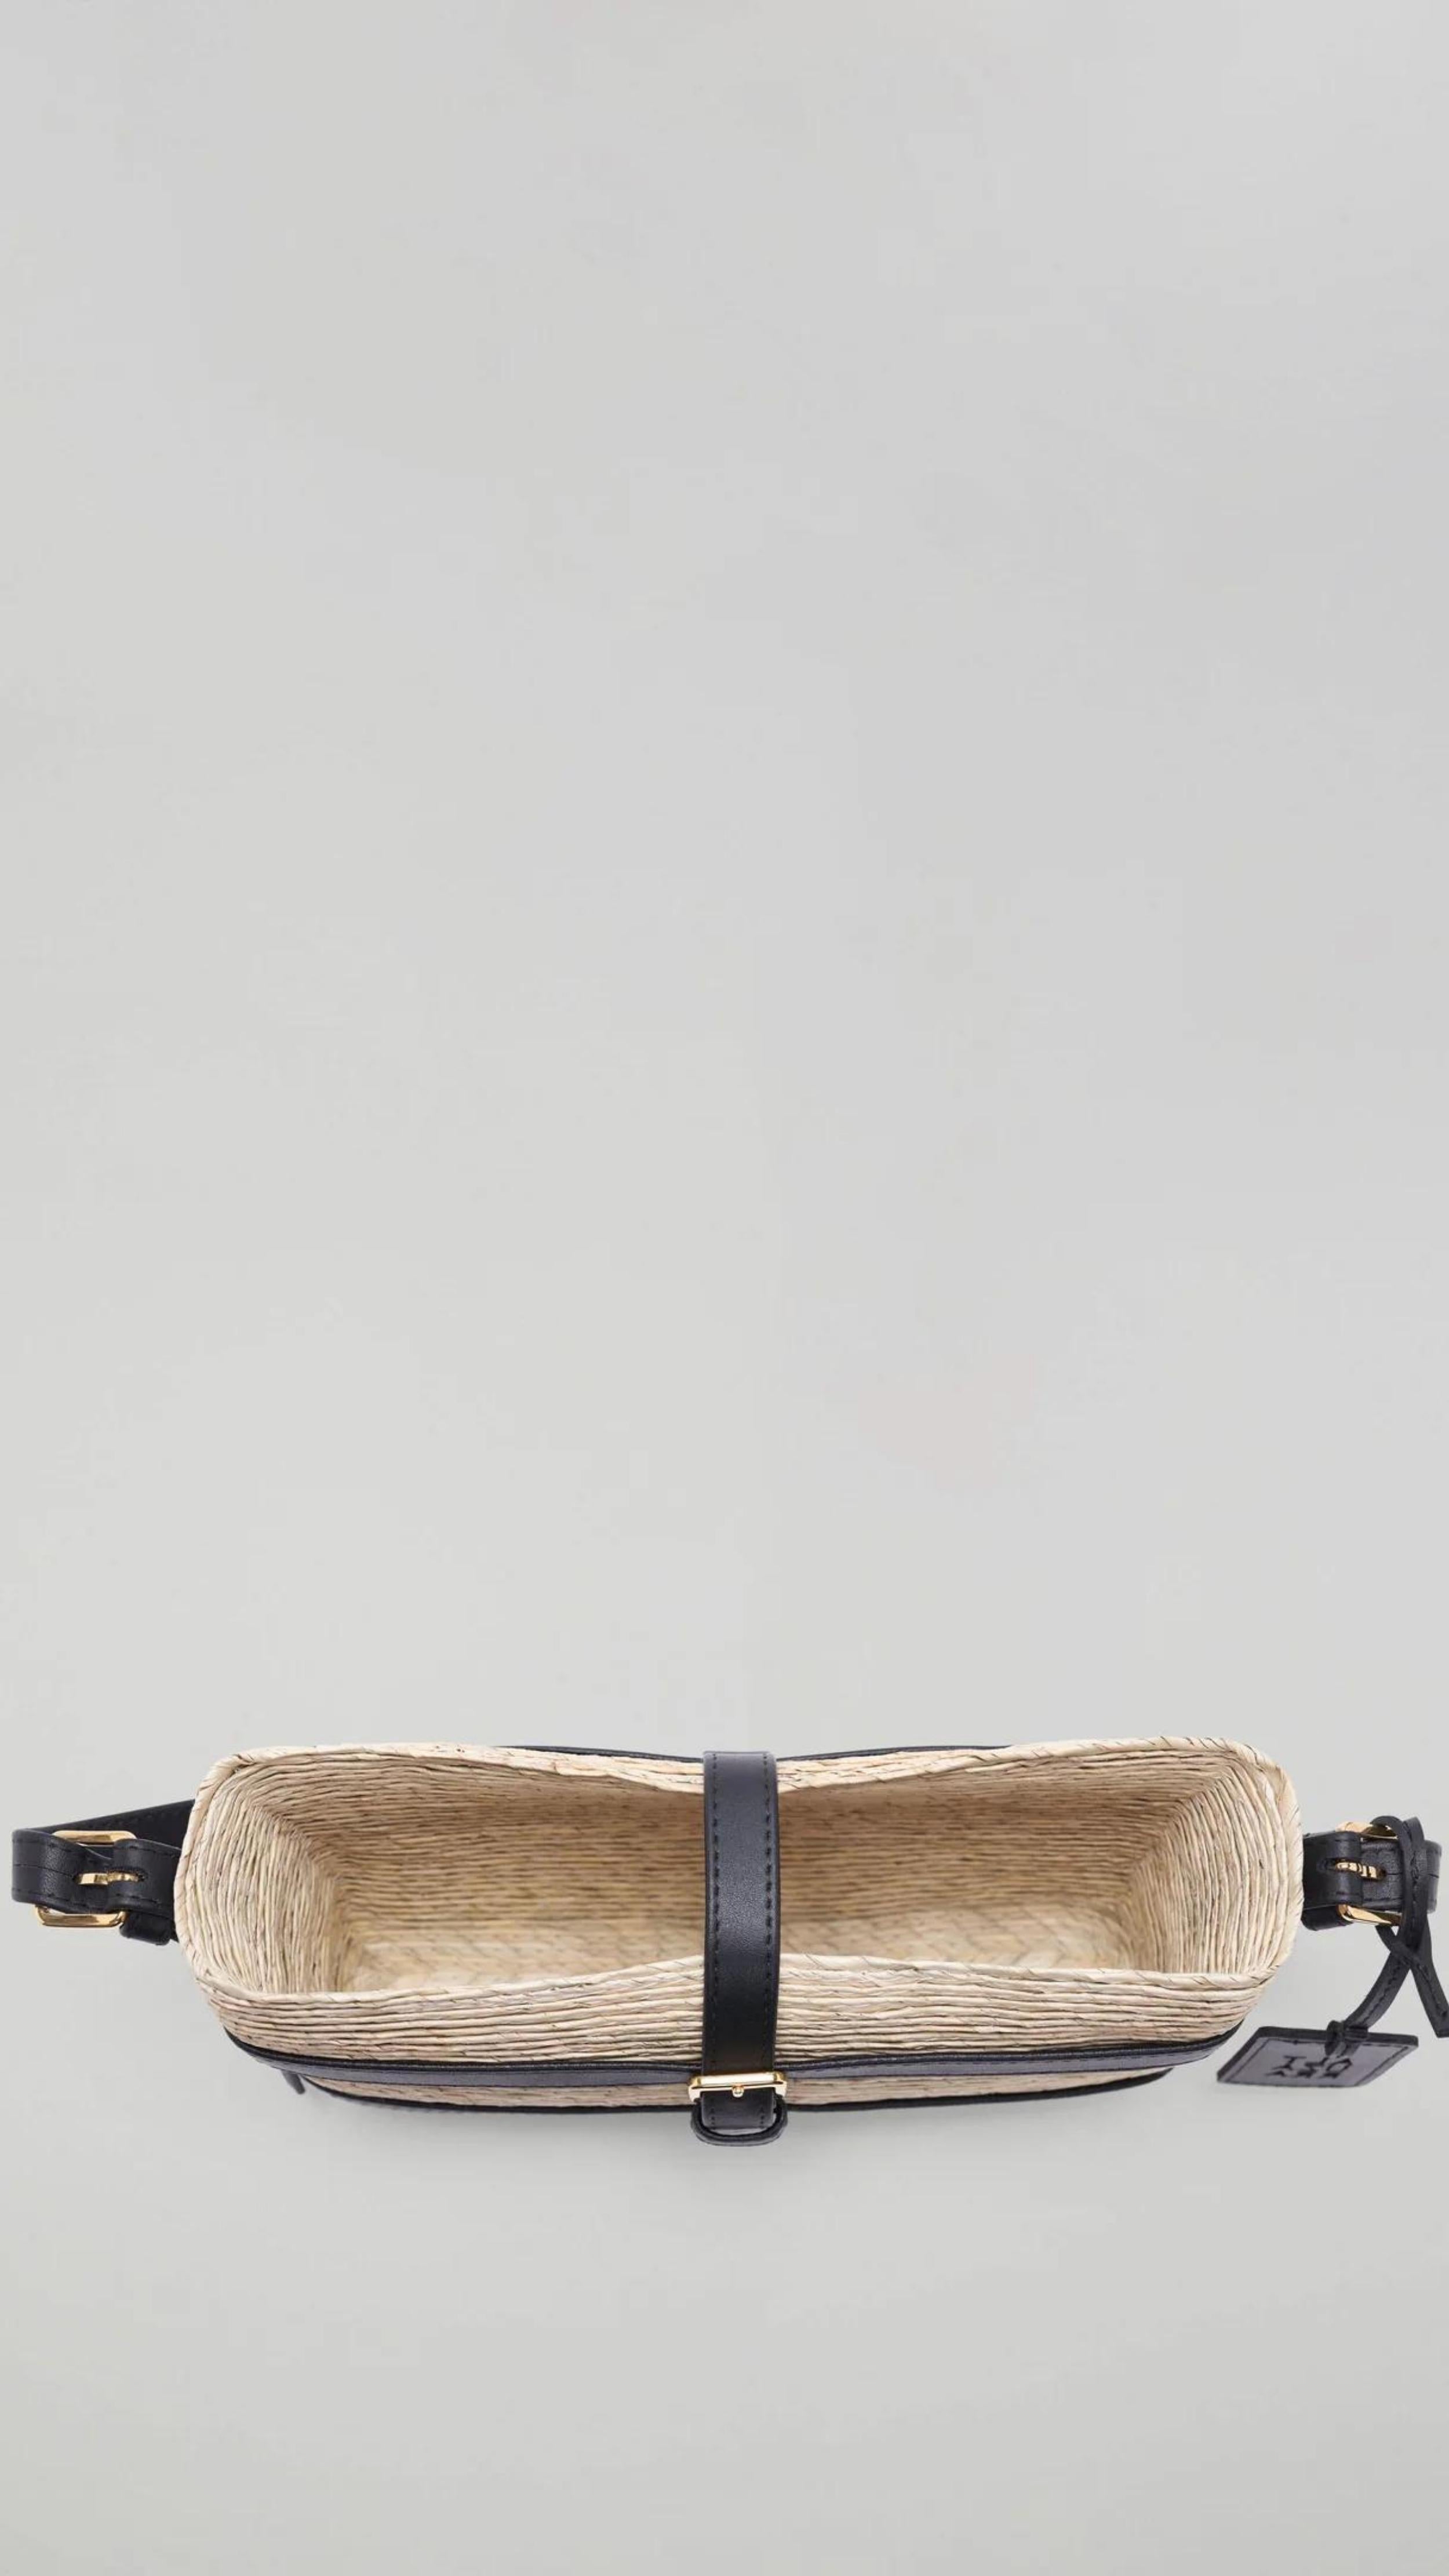 Altuzarra Watermill Shoulder Bag in Natural and Black. Summer raffia clutch with adjustable leather straps. Natural raffia color with black leather detailing and gold hardware. This is a summer purse. Shown from top view. Available with Experience 27 in Madrid Spain